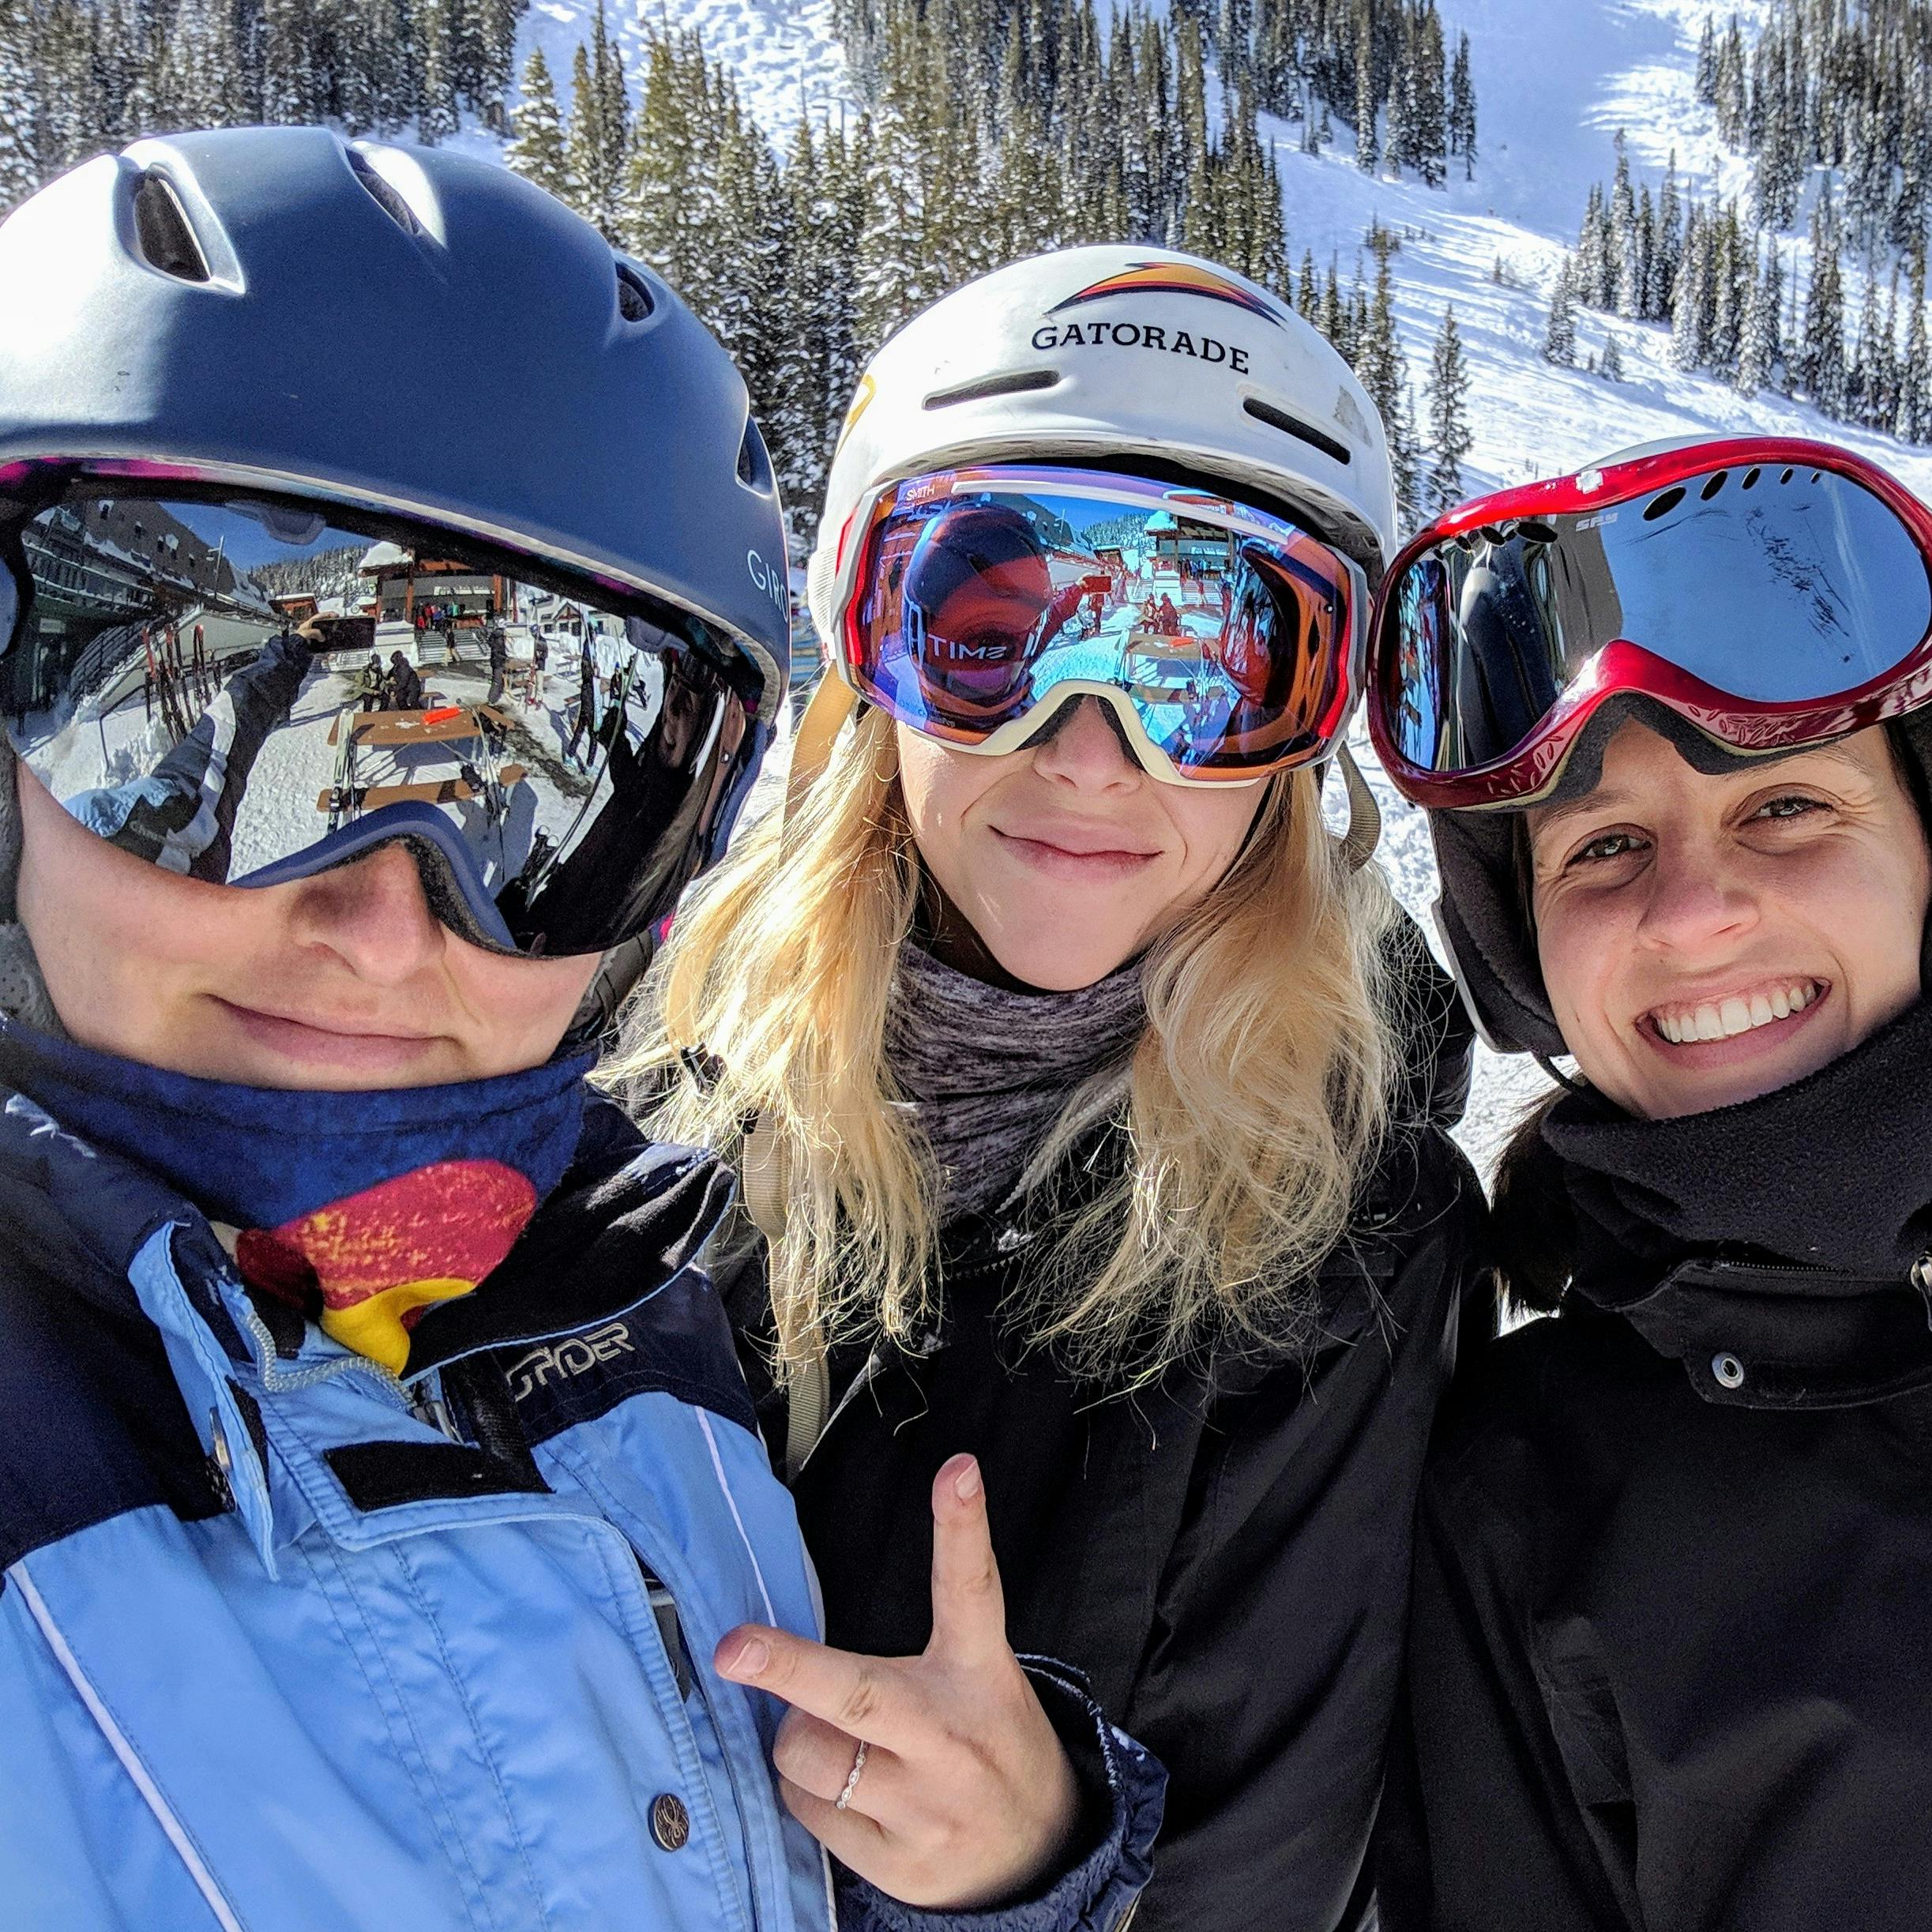 Three skiers wearing helmets are all smiling at the camera. There is a ski run visible in the background. 